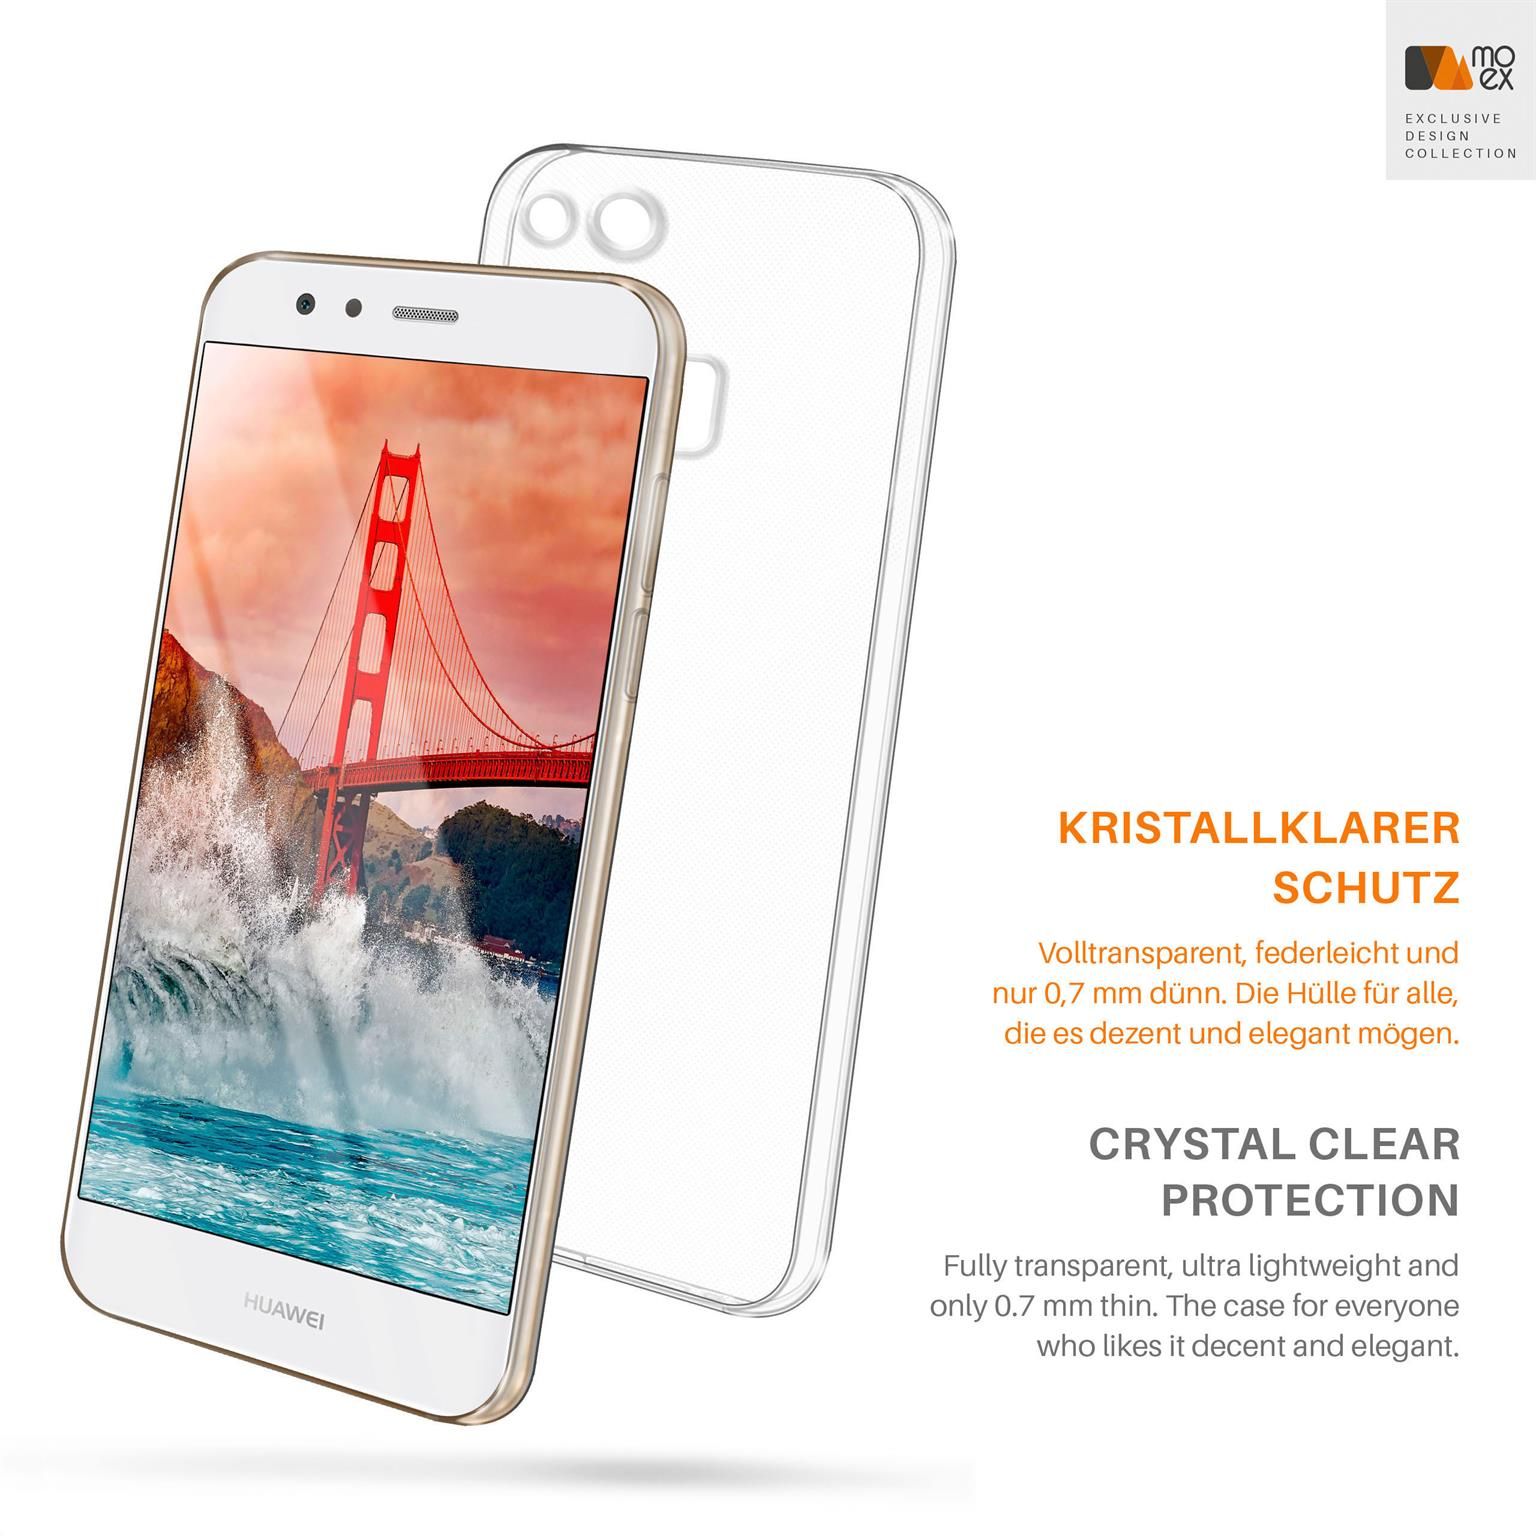 MOEX Aero Case, Backcover, Huawei, P10 Crystal-Clear Lite